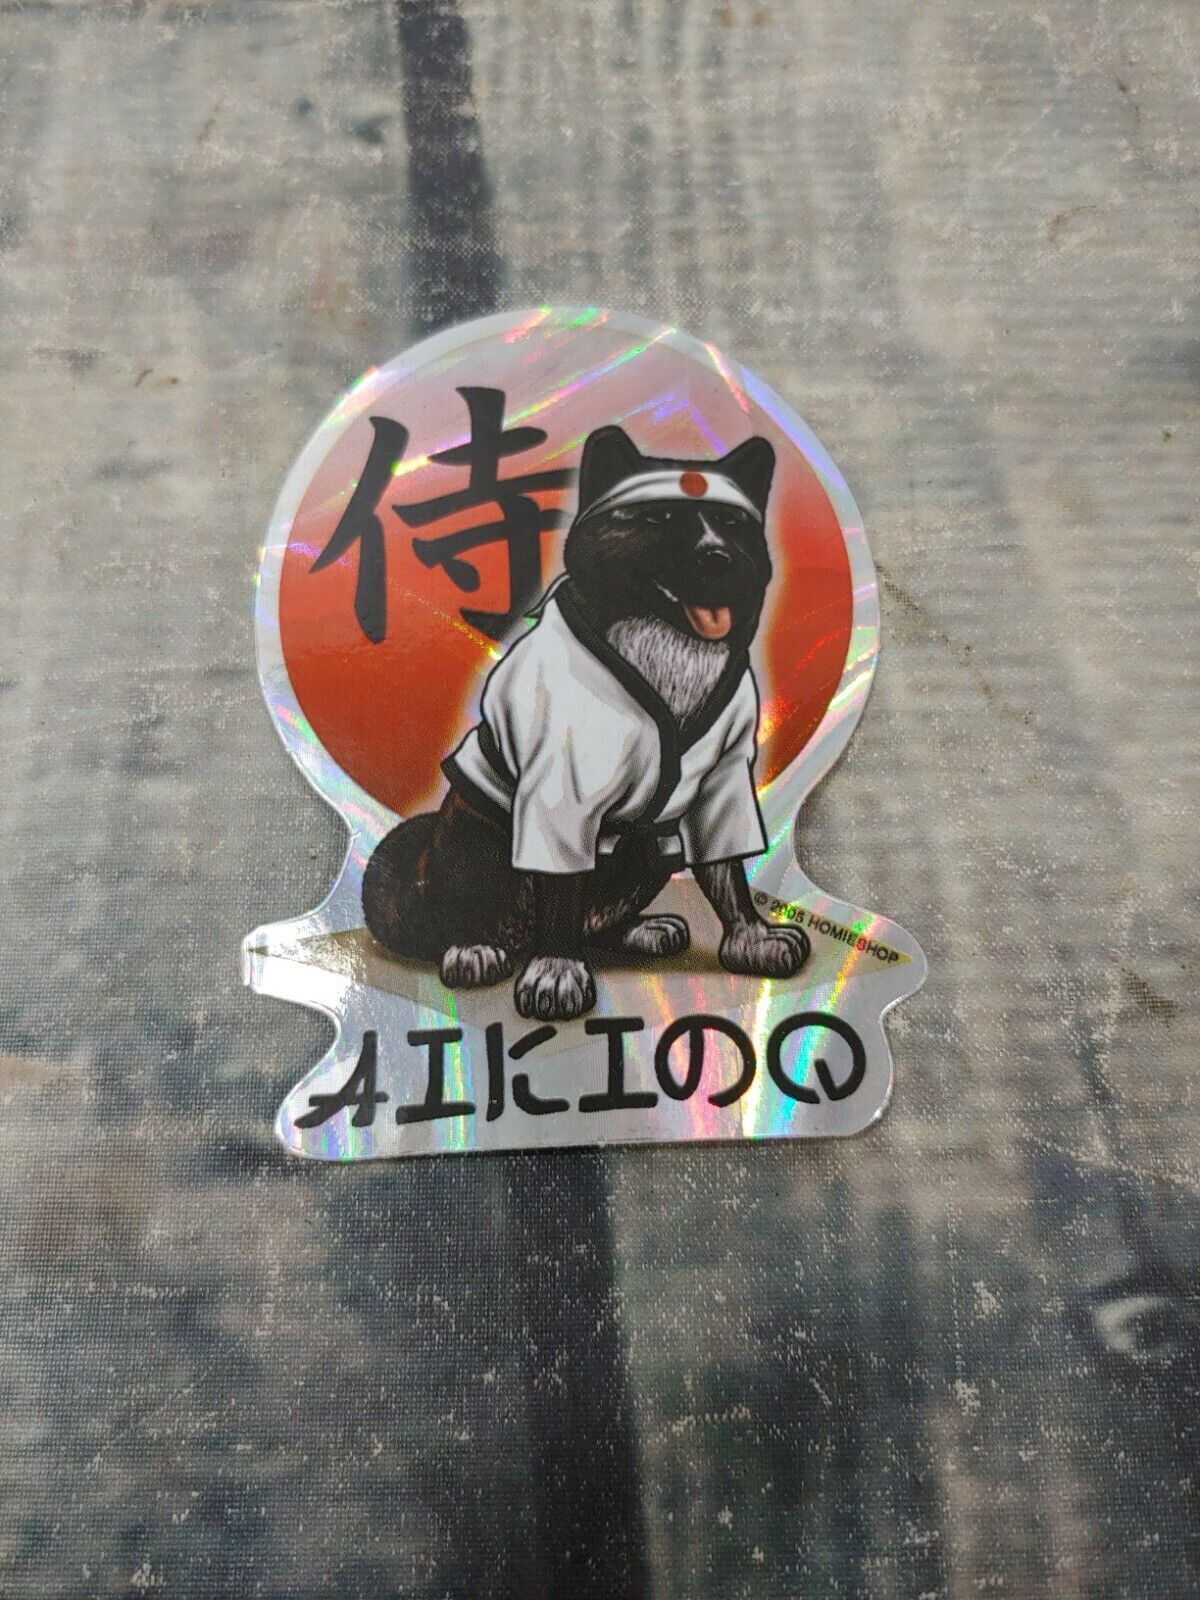 2005 Homies County Dog Pound Collectible Sticker Aikido 9 of 12 series #1